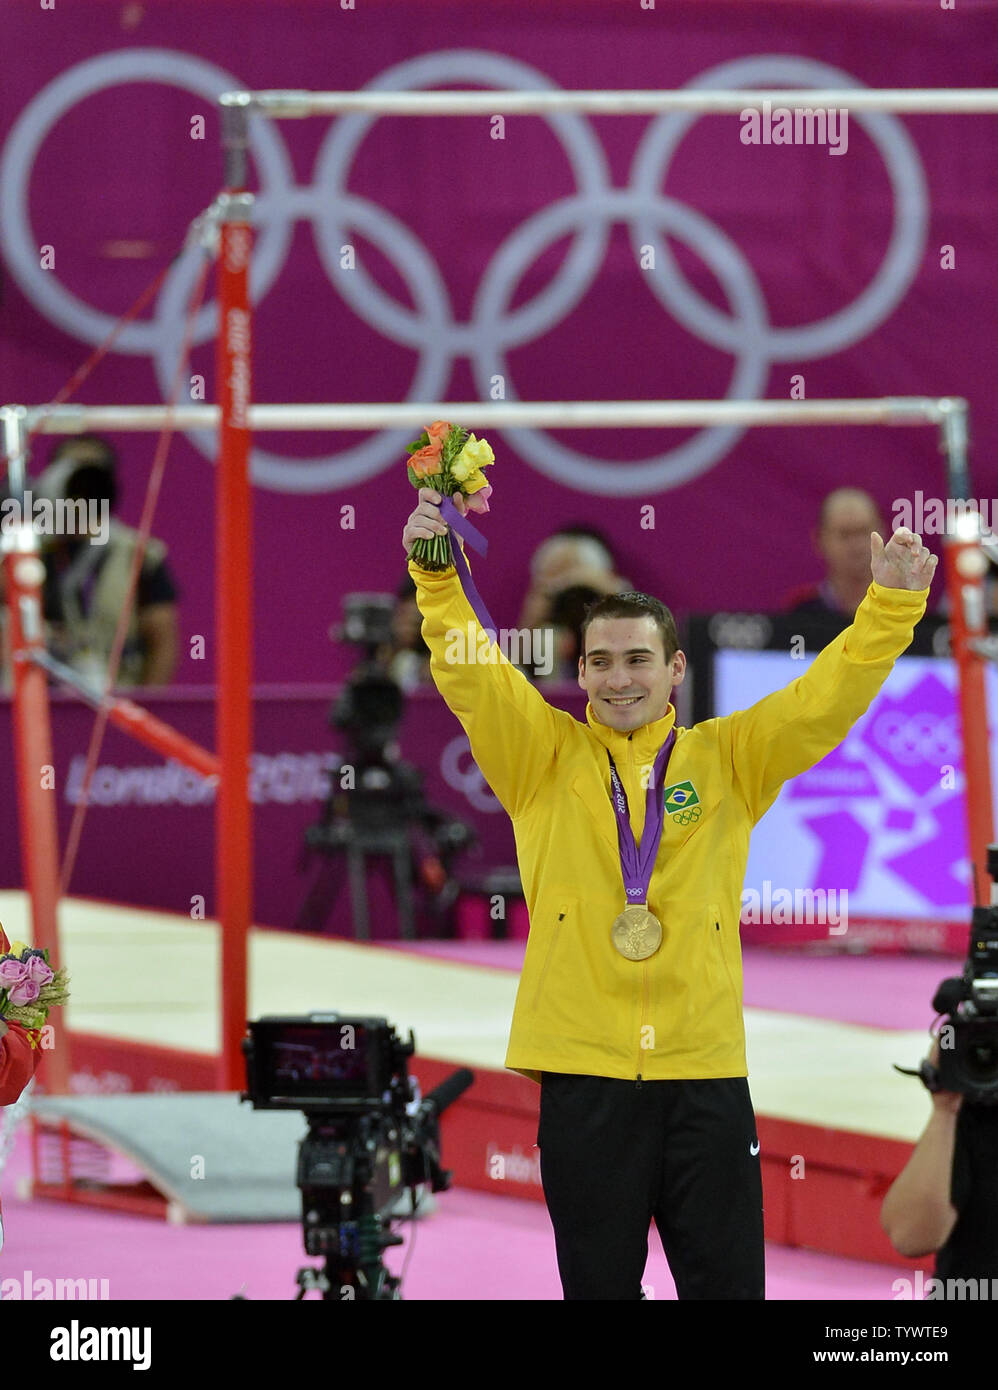 Gymnastics gold medal winner for the Apparatus Finals on the rings, Brazil's Arthur Nabarette Zanetti, raises his hands in jubilation, during the awards ceremony, at the Greenwich North Arena at the 2012 Summer Olympics, August 6, 2012, in London, England.              UPI/Mike Theiler Stock Photo